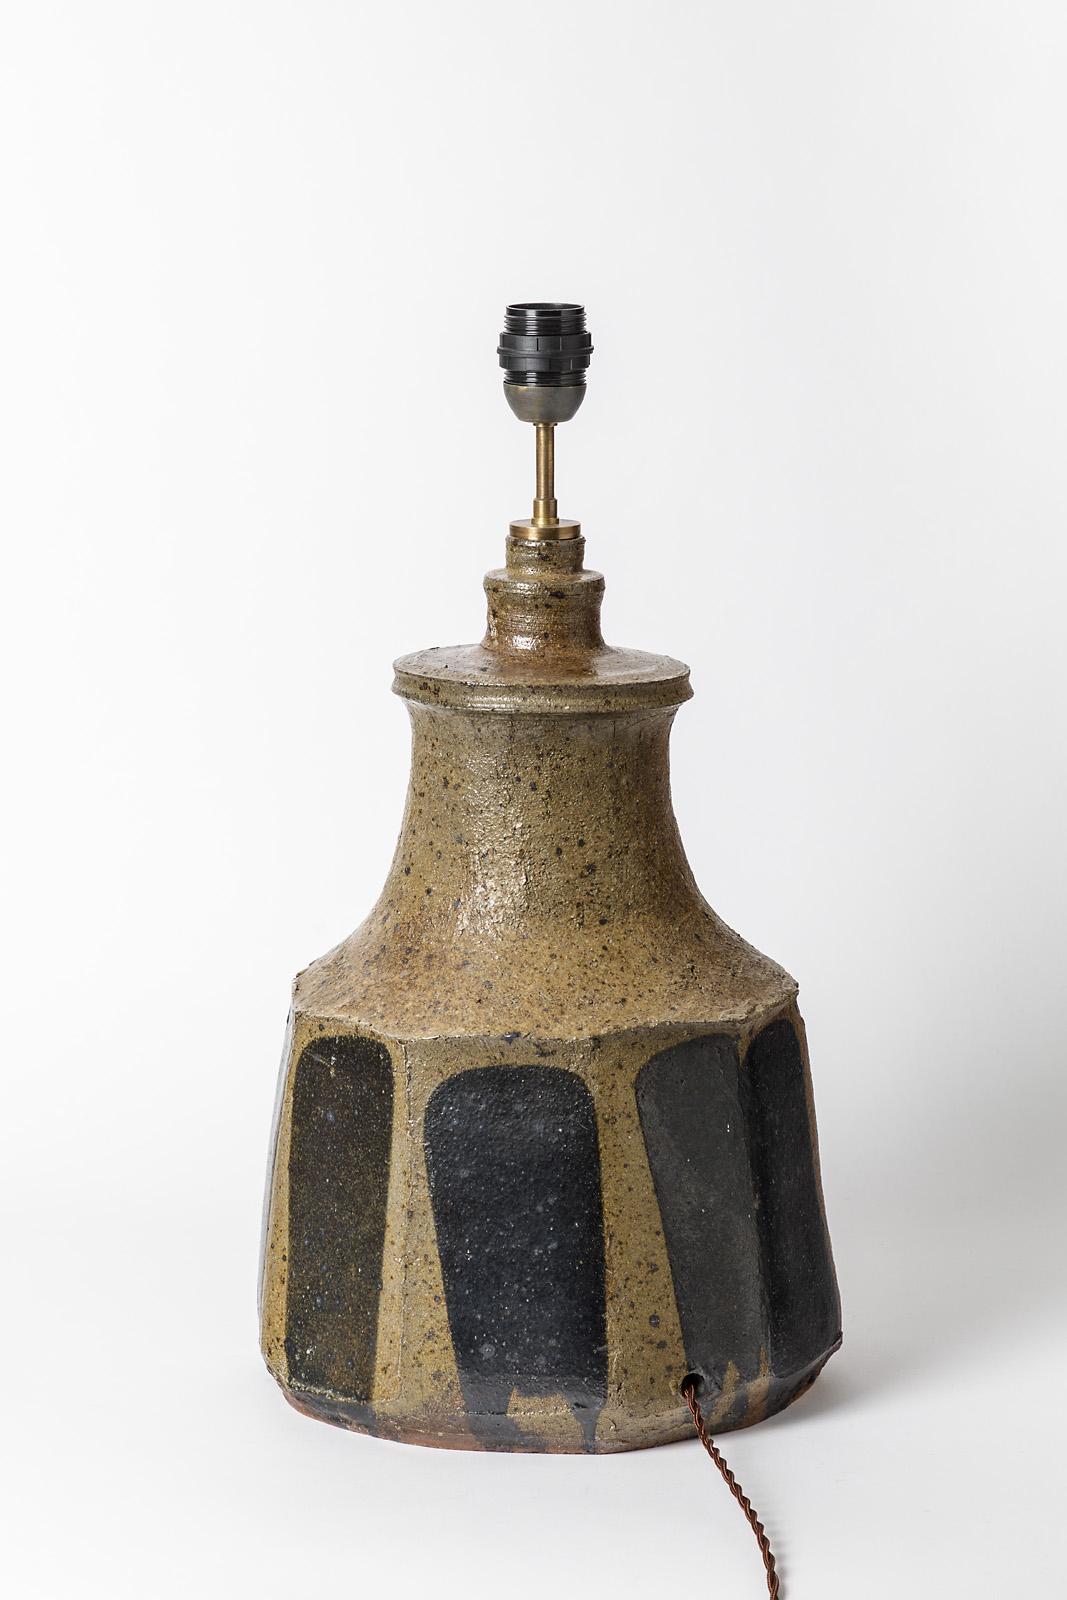 Gustave Tiffoche (1930-2011)

Exceptional and massive stoneware ceramic table lamp.

Sculptural and abstract black and brown ceramic glaze.

Excellent original condition 

Signed under the base: TIFFOCHE

Electric system is new and